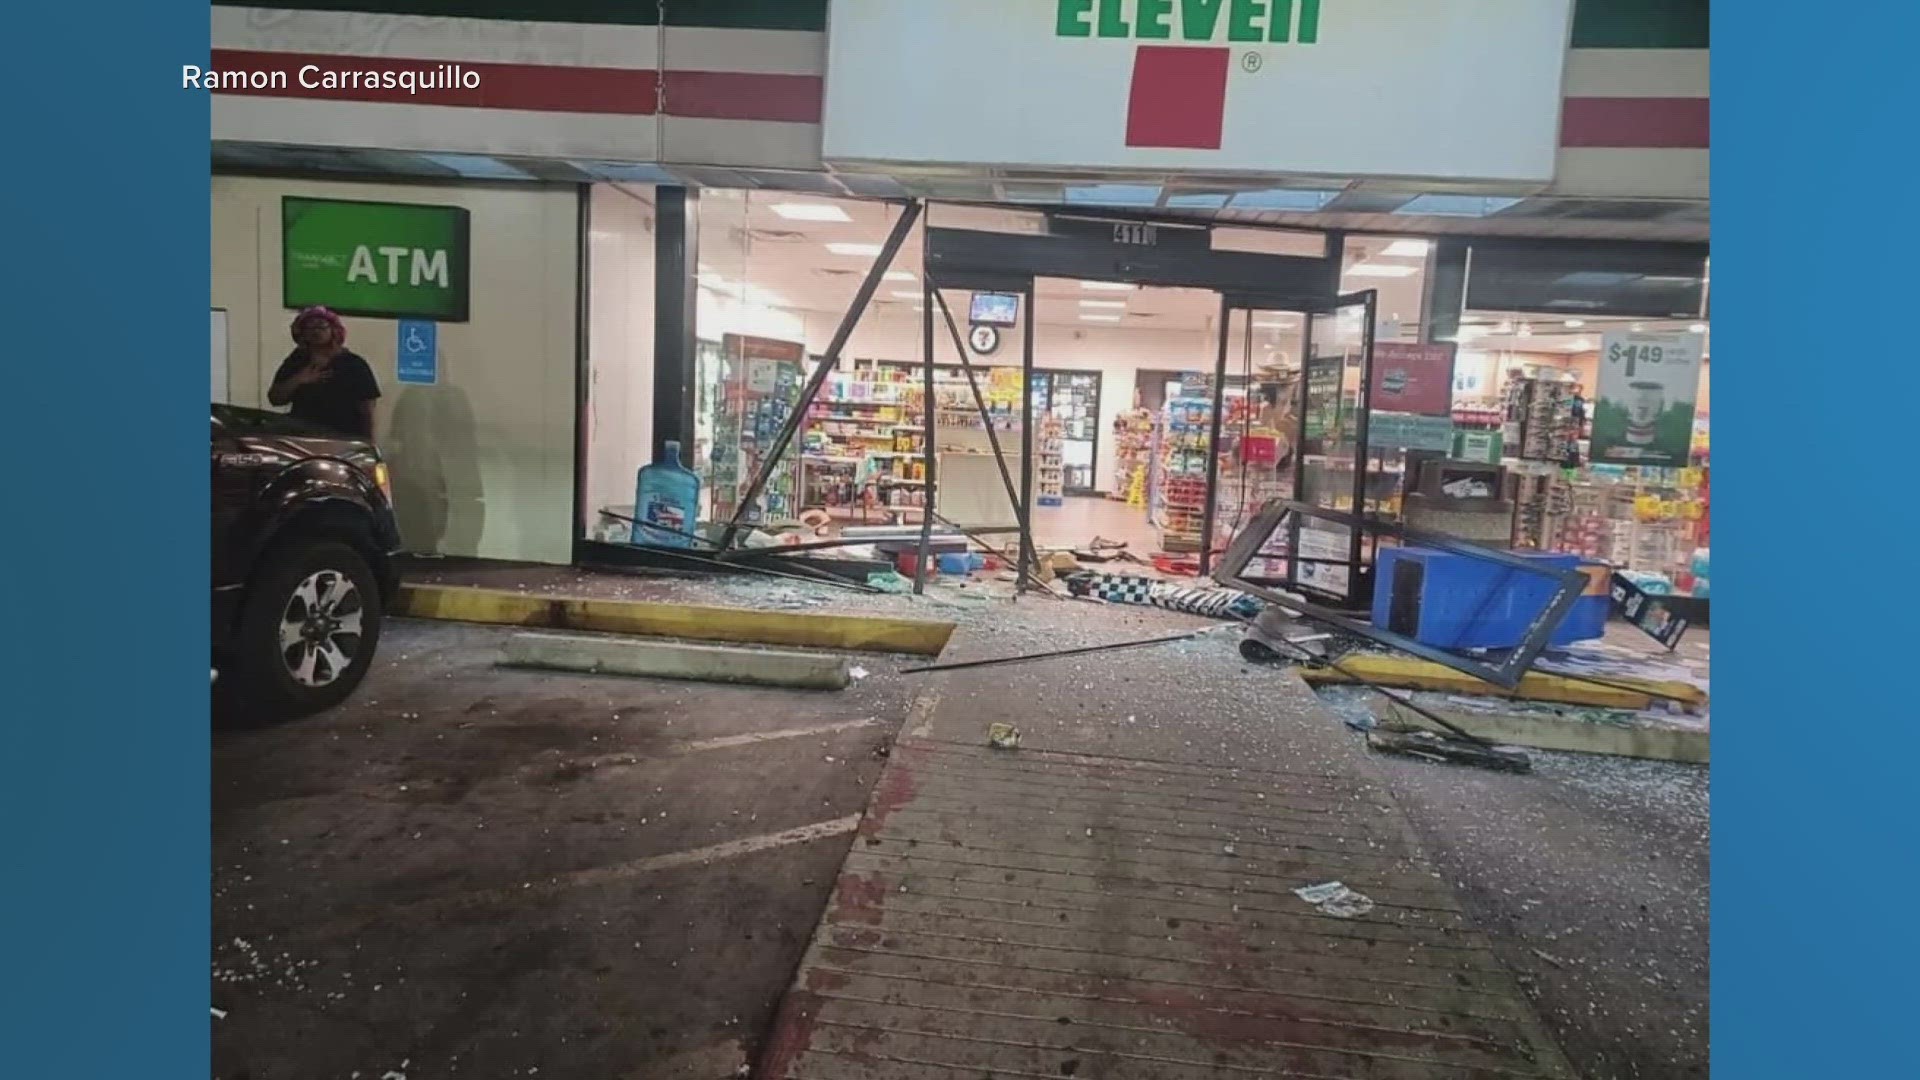 The Temple Police Department said an ATM was stolen from a Temple 7-11 on Sept. 28, but there is no evidence to confirm it was connected to other recent ATM thefts.